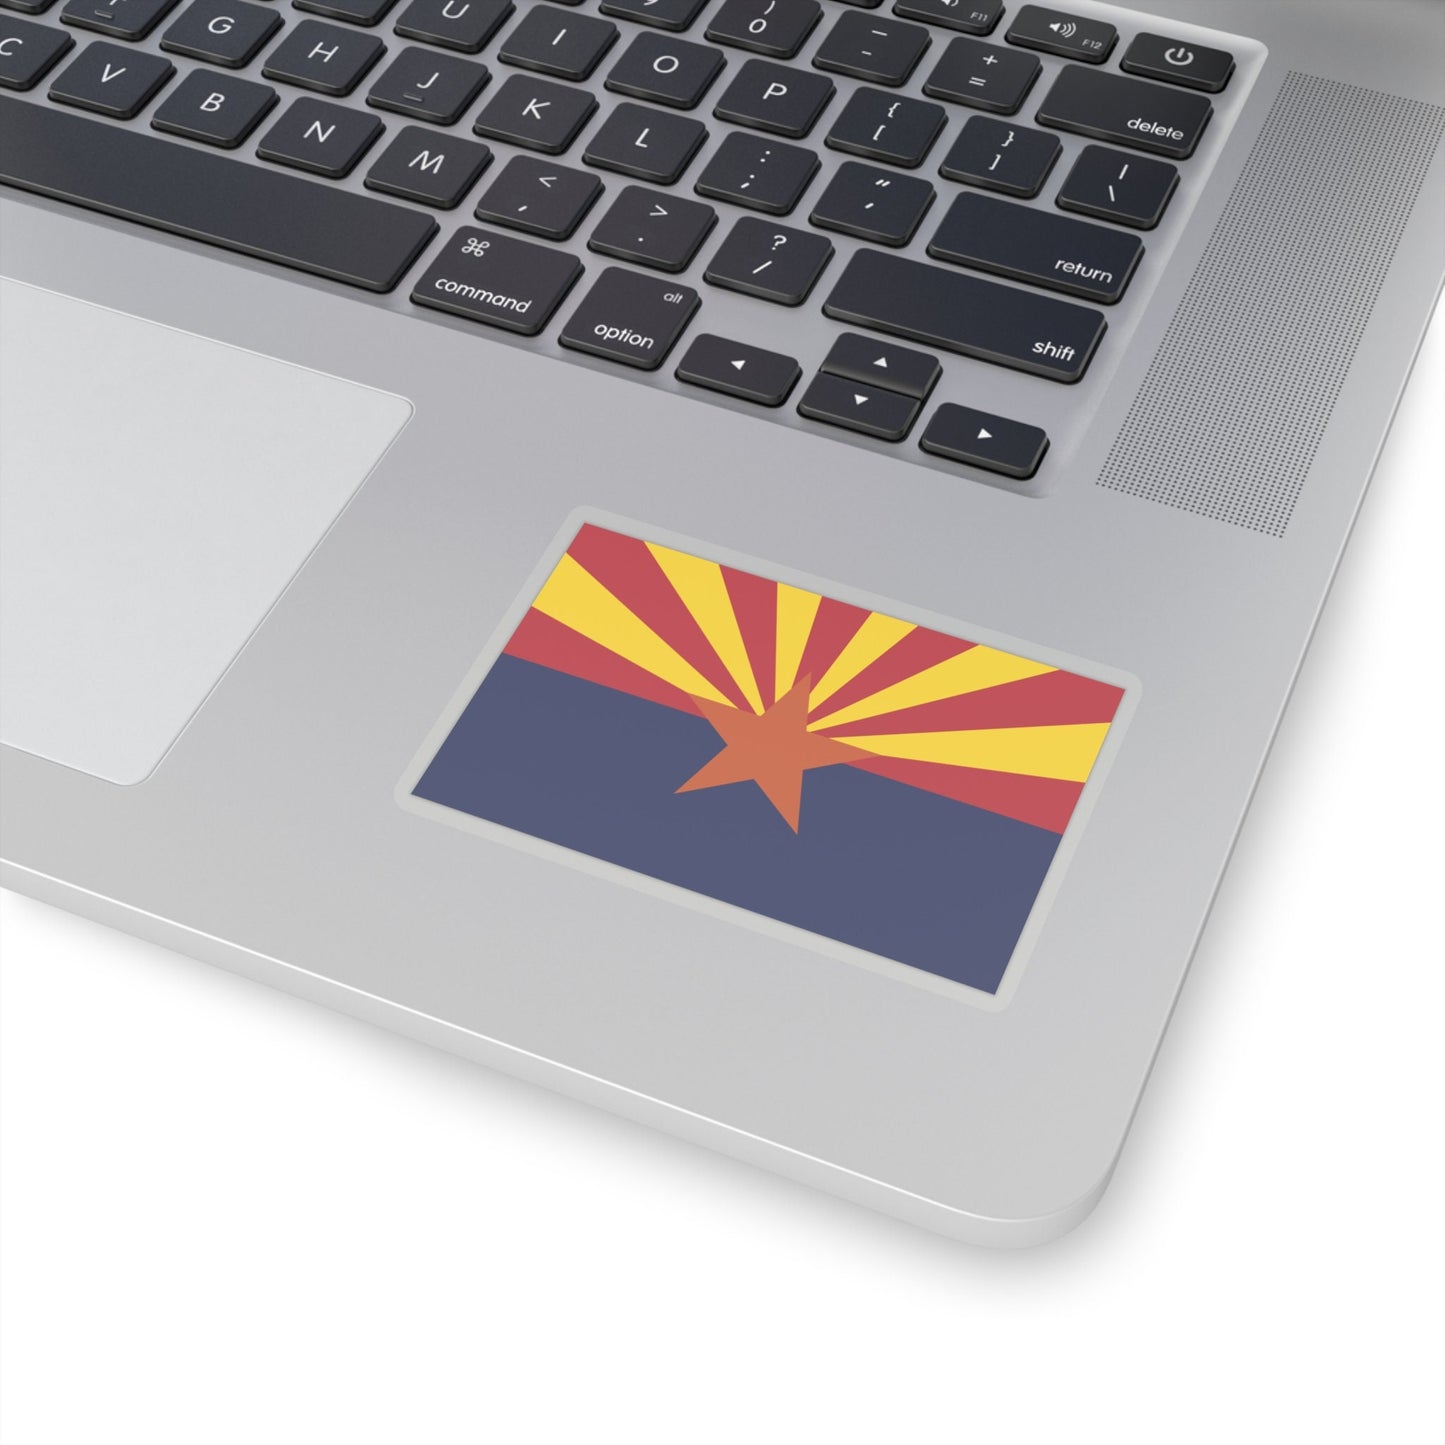 Arizona Flag Stickers, Great way to show your state pride